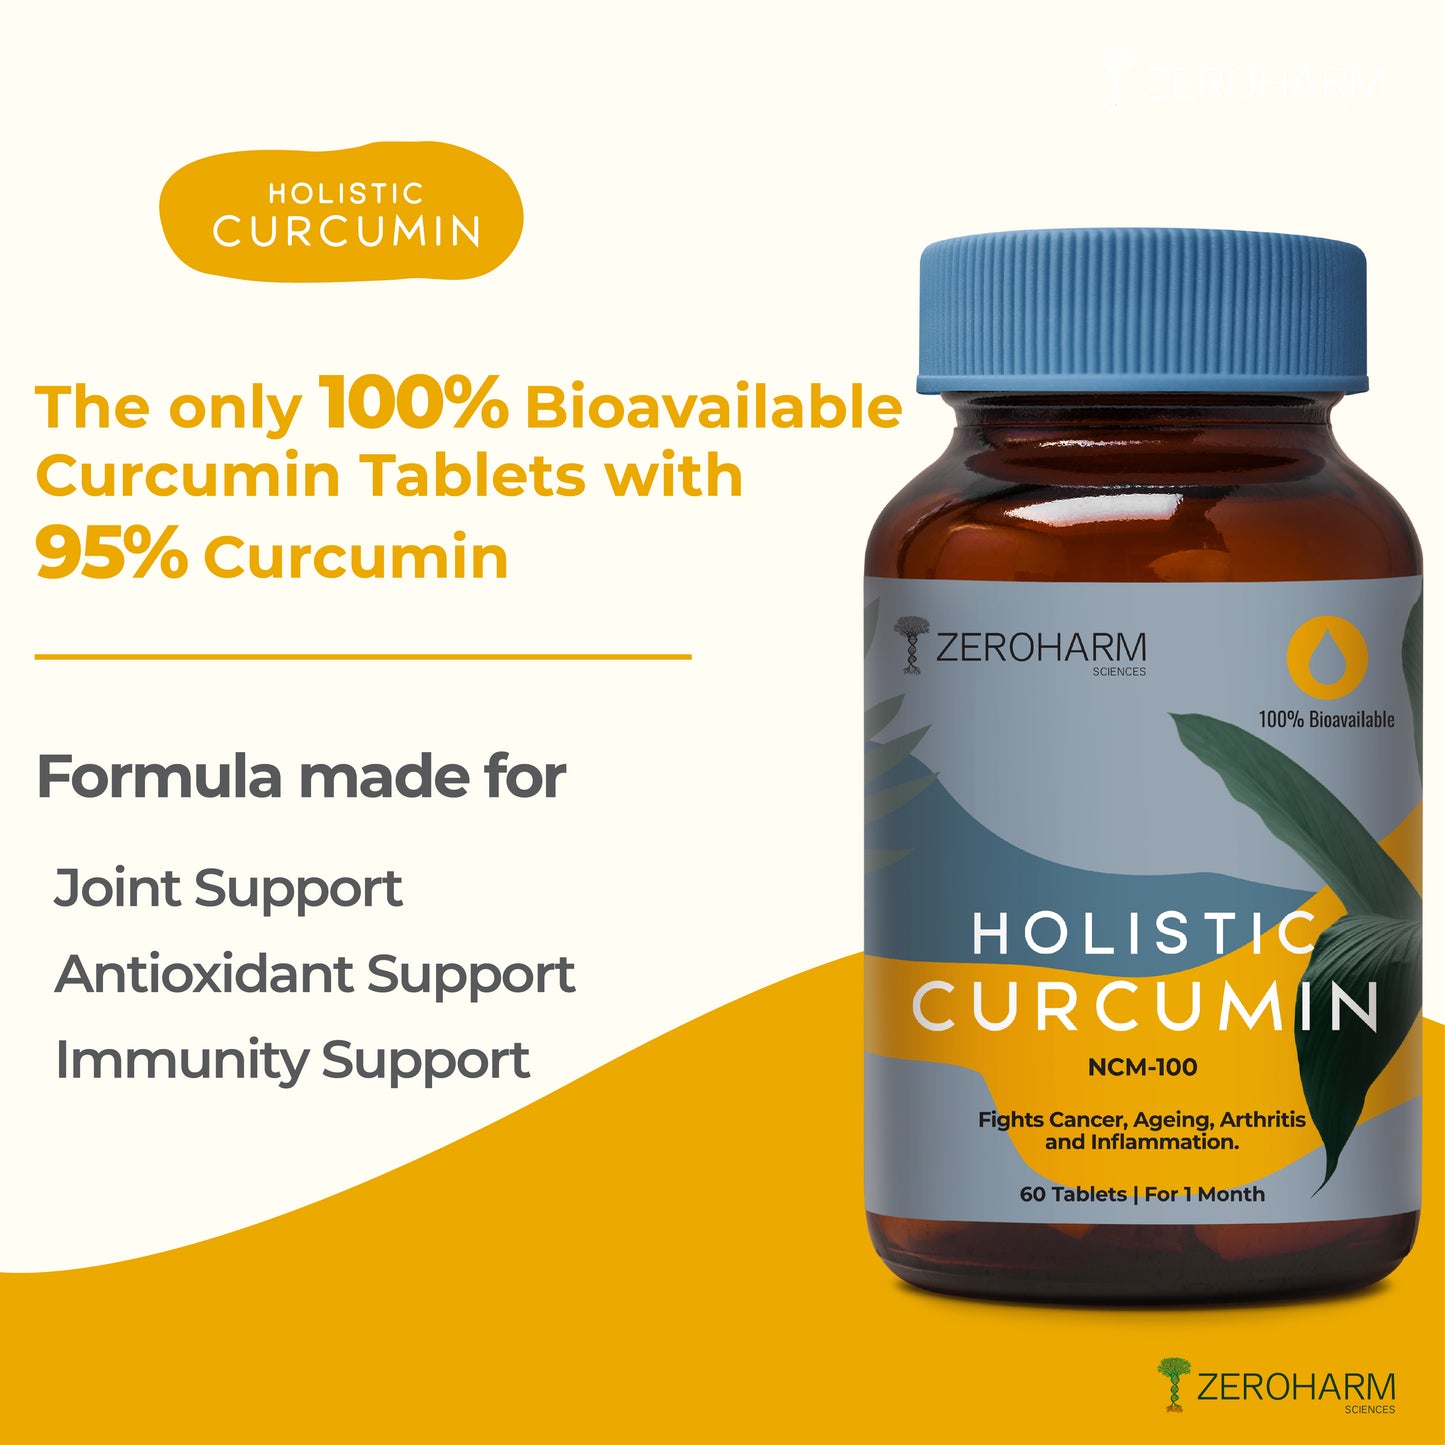 turmeric supplements made for joint and immunity support